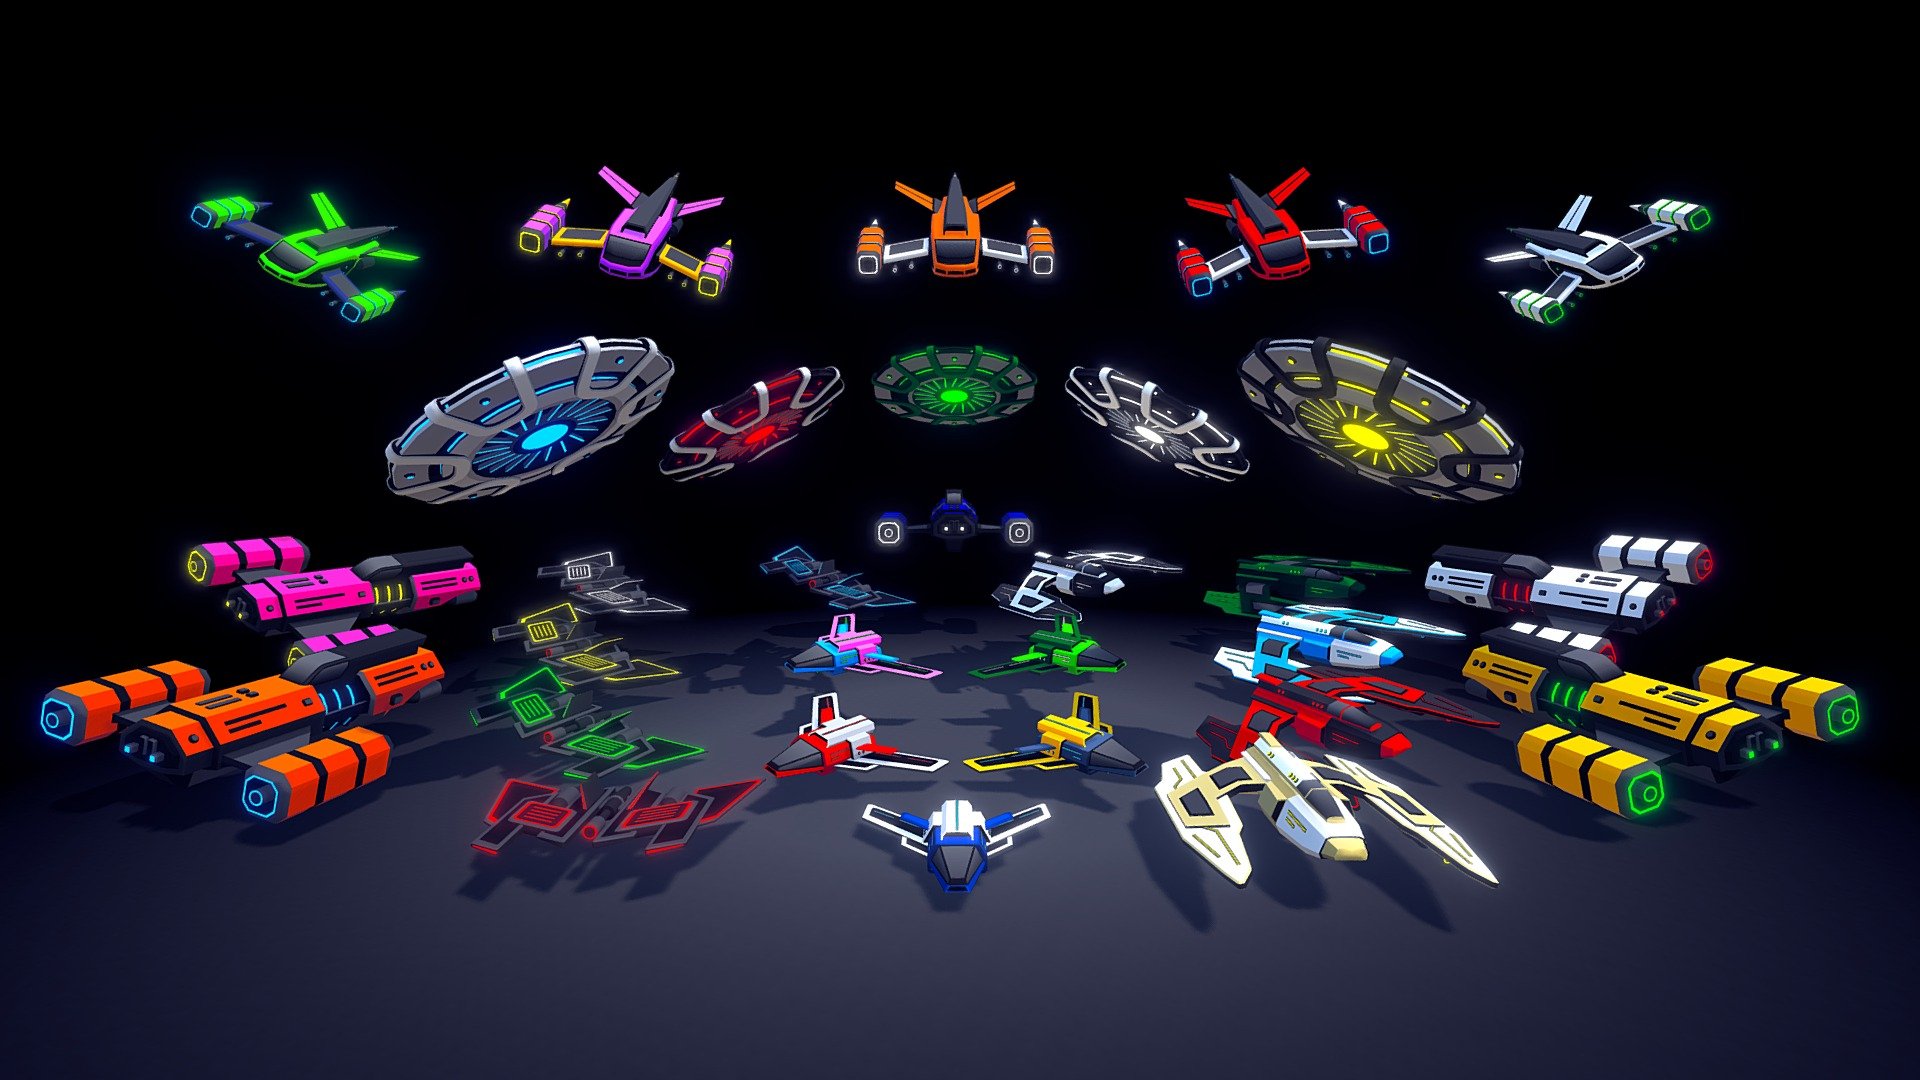 This is the May update of ARCADE: Ultimate Vehicles Pack!. All these vehicles will be added in May 8th with no additional cost. Available in Unity3D (in the Unity Asset Store and Sketchfab.

This update includes 6 new spaceships!. I hope you like it.

NOTE: For those whose projects don't involve spaceships, don't worry, I just wanted to expand the diversity of Space Vehicles. In the June update I will come back to the usual Land/Air/Water vehicles.

Best regards, Mena 3d model